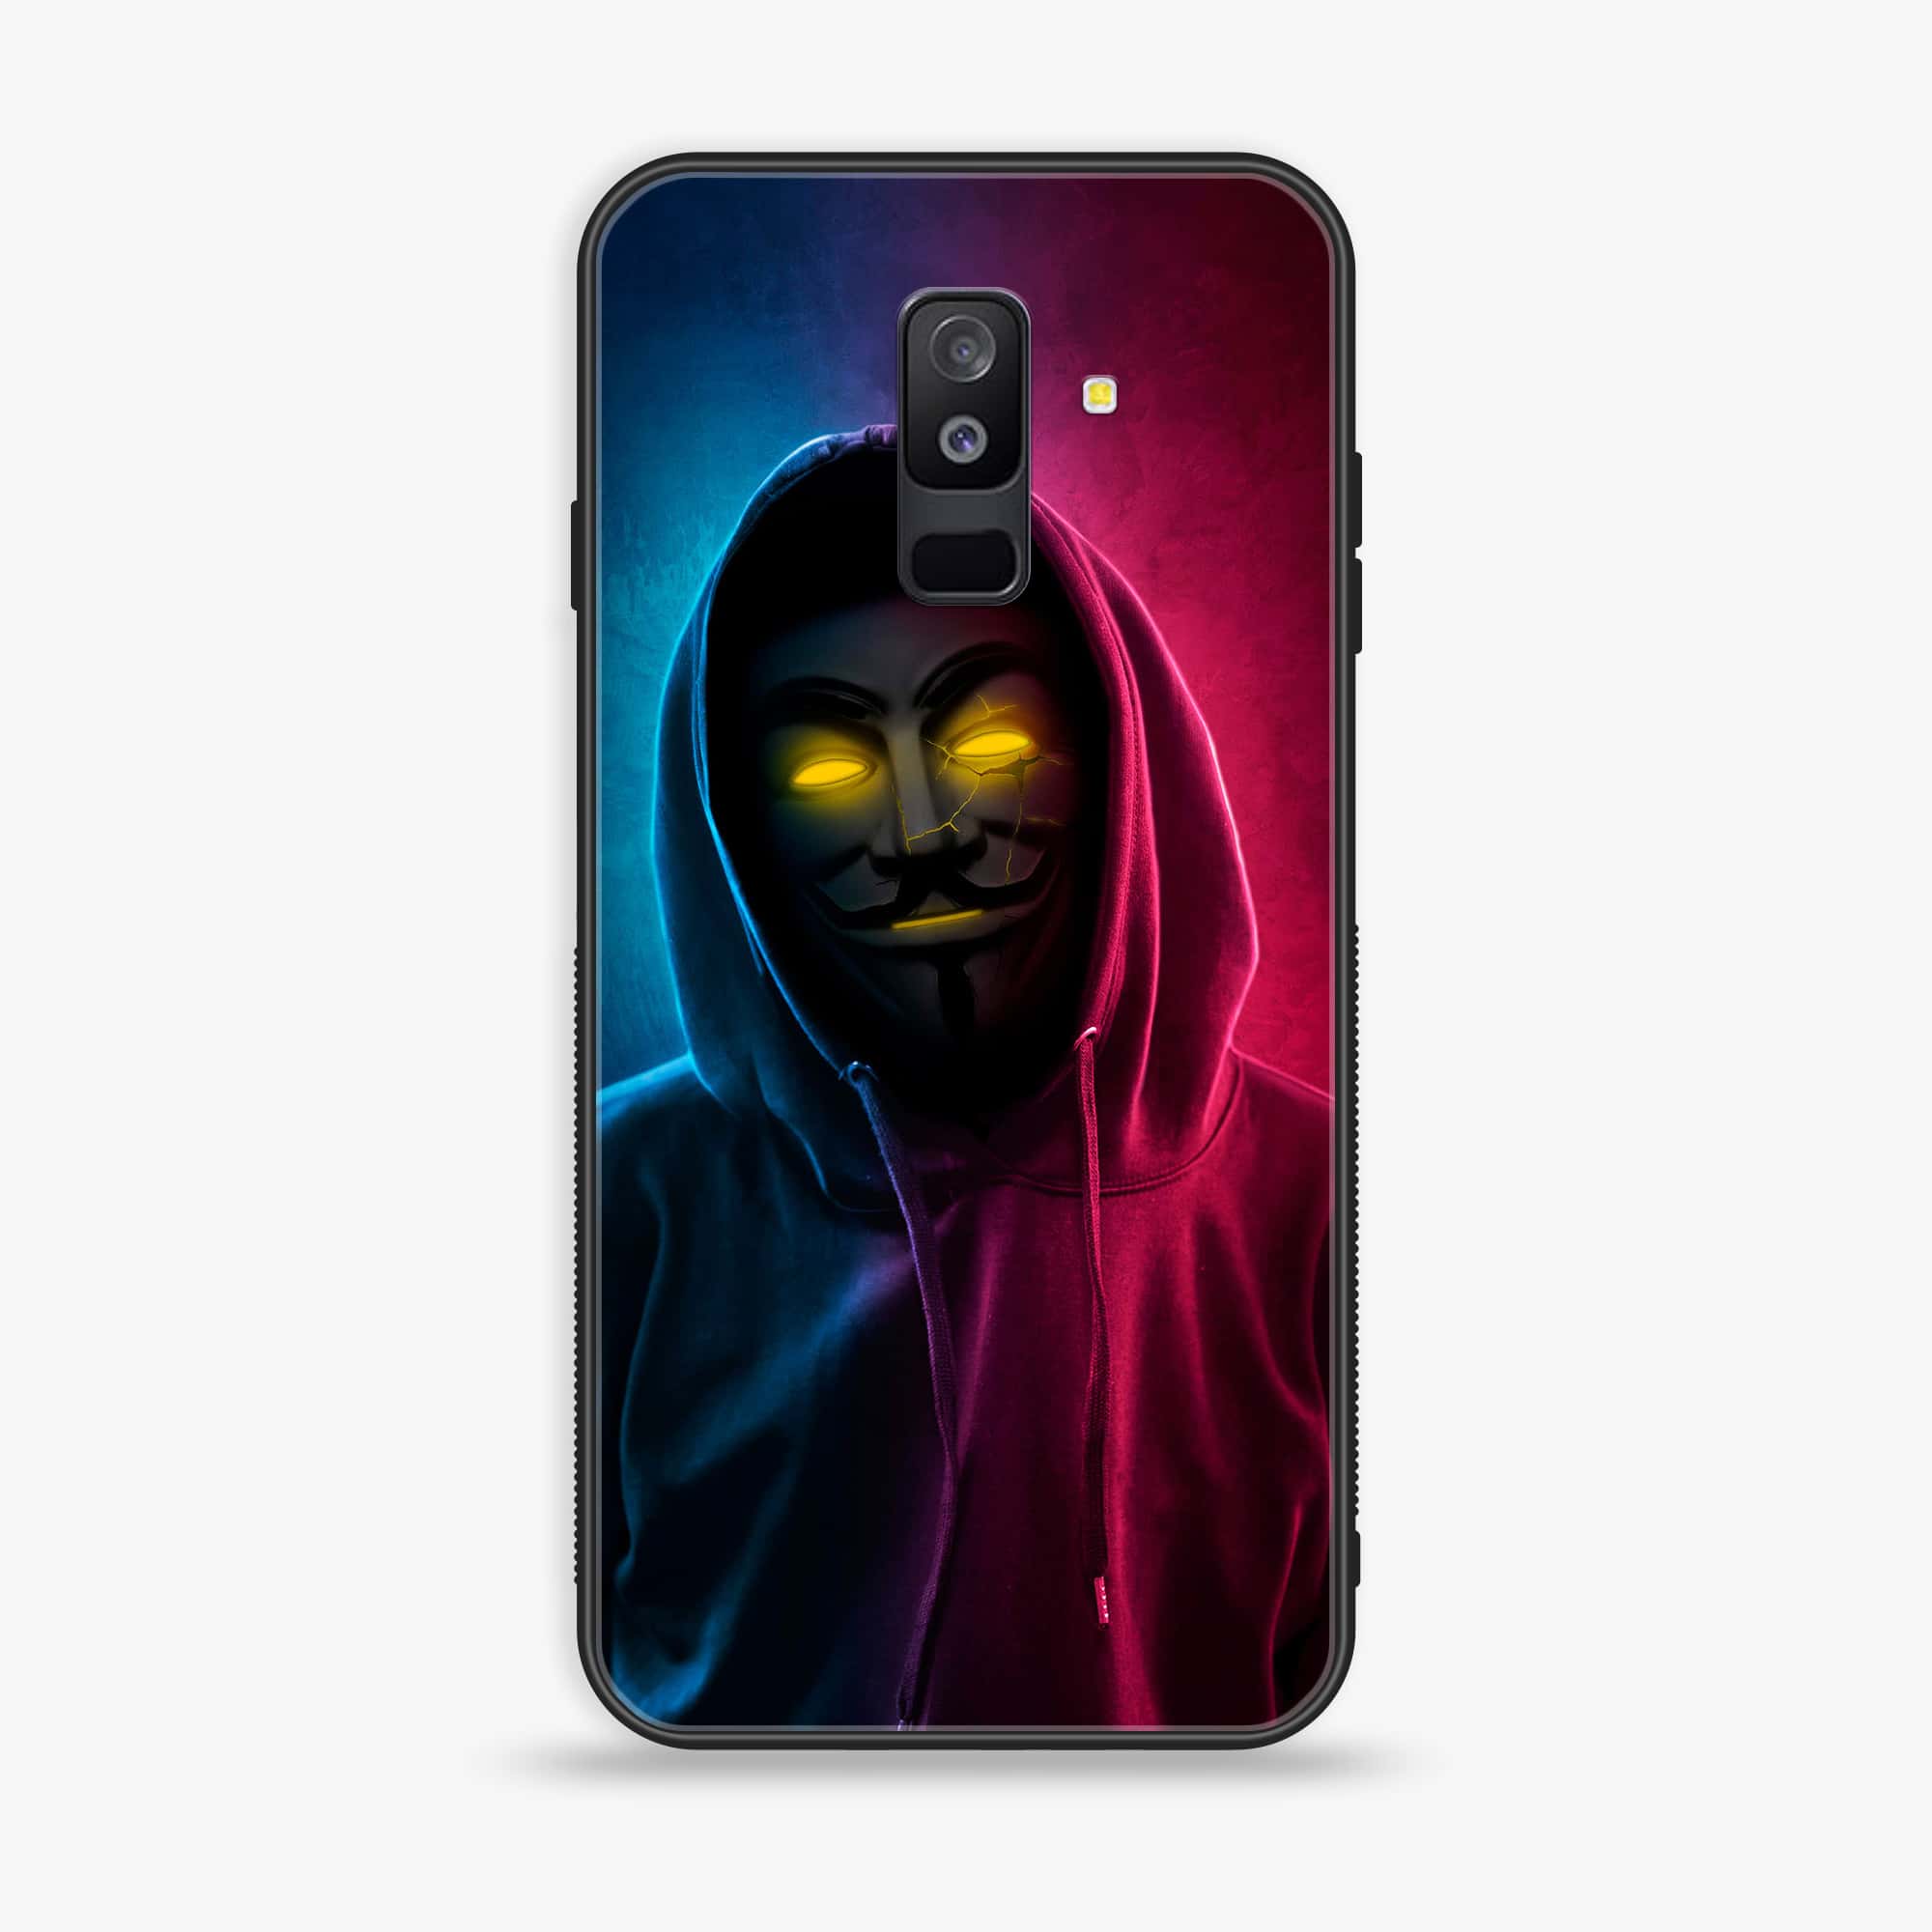 Samsung Galaxy A6 Plus (2018) - Anonymous 2.0 Series - Premium Printed Glass soft Bumper shock Proof Case